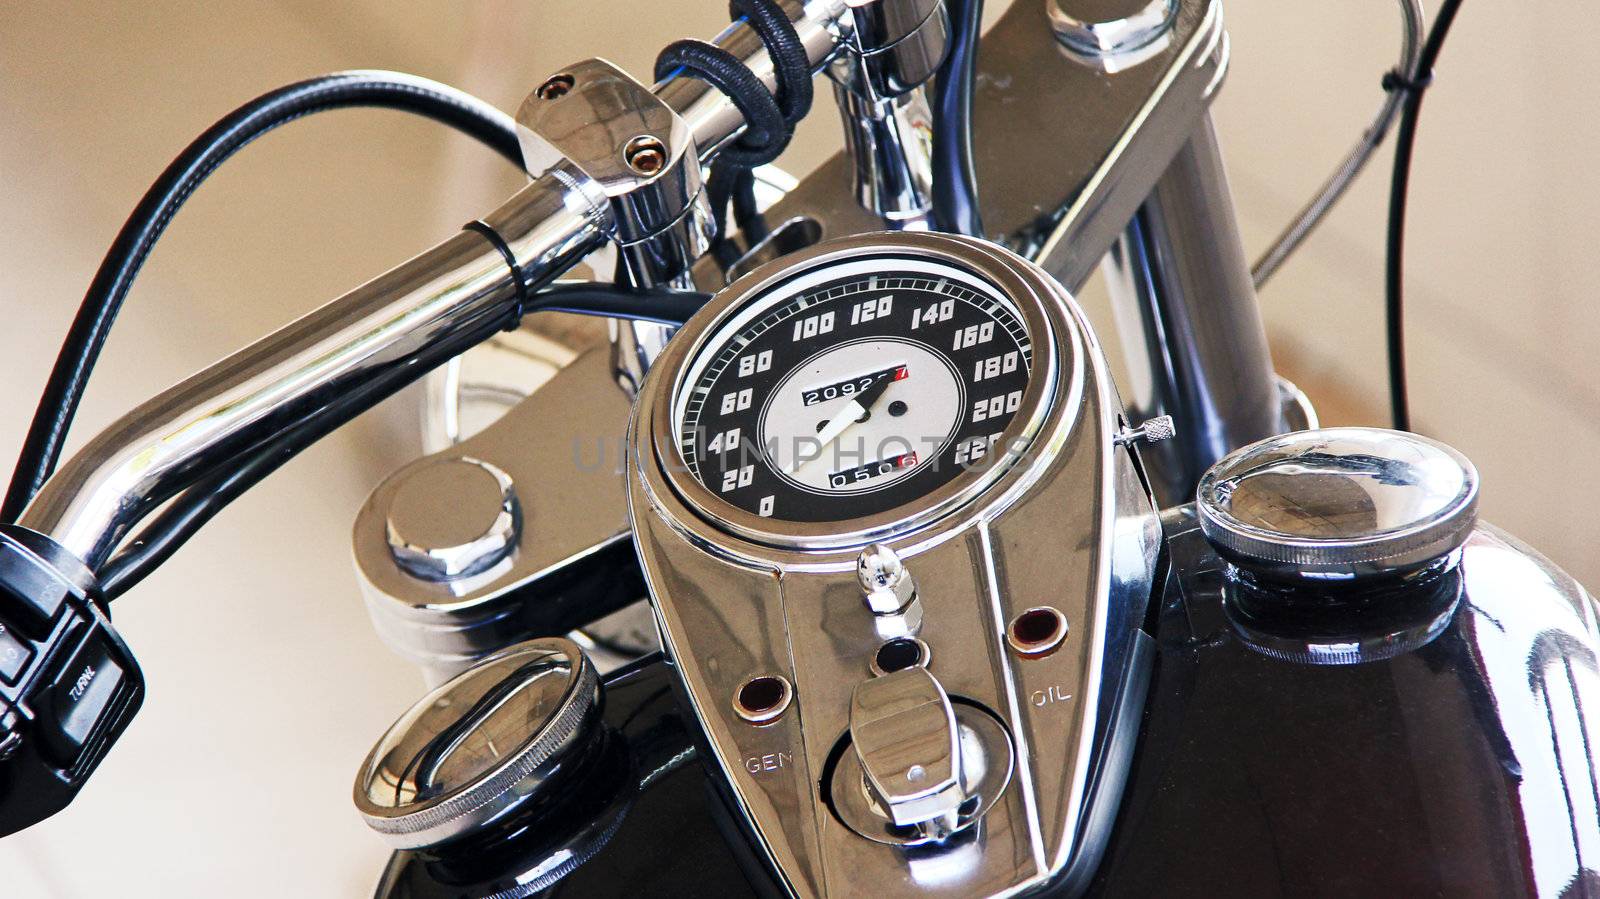 detail picture of tank and tachometer on a chromed chopper